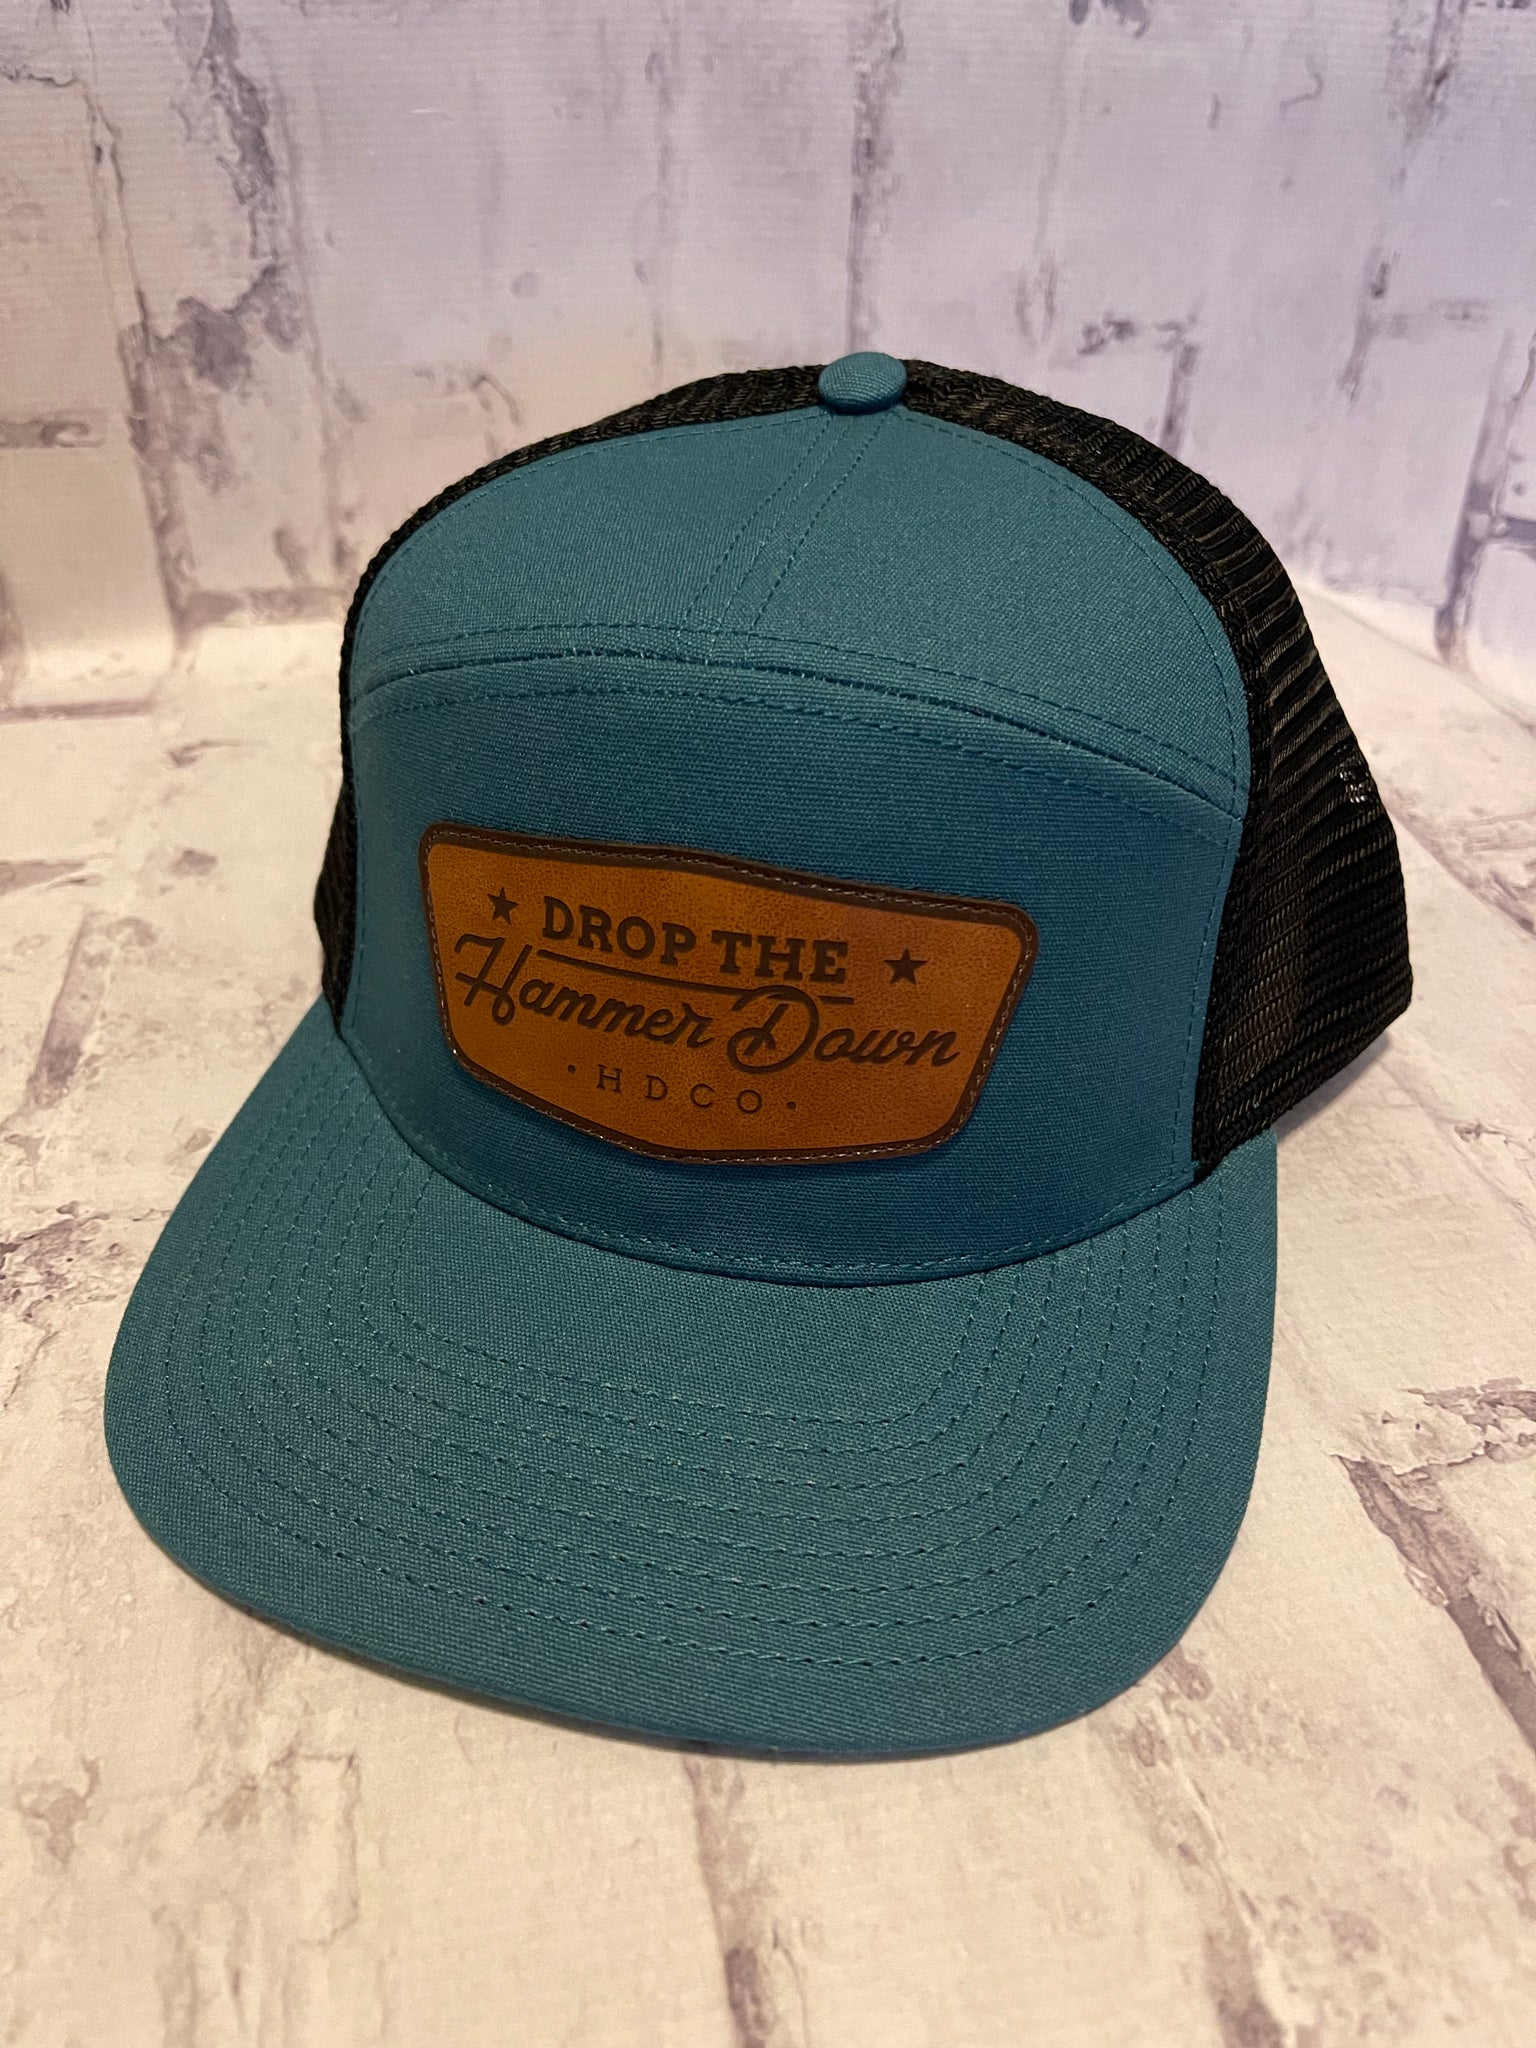 Hammer Down "Stars Badge" Trucker Hat - Blue with Leather Patch - Southern Charm "Shop The Charm"